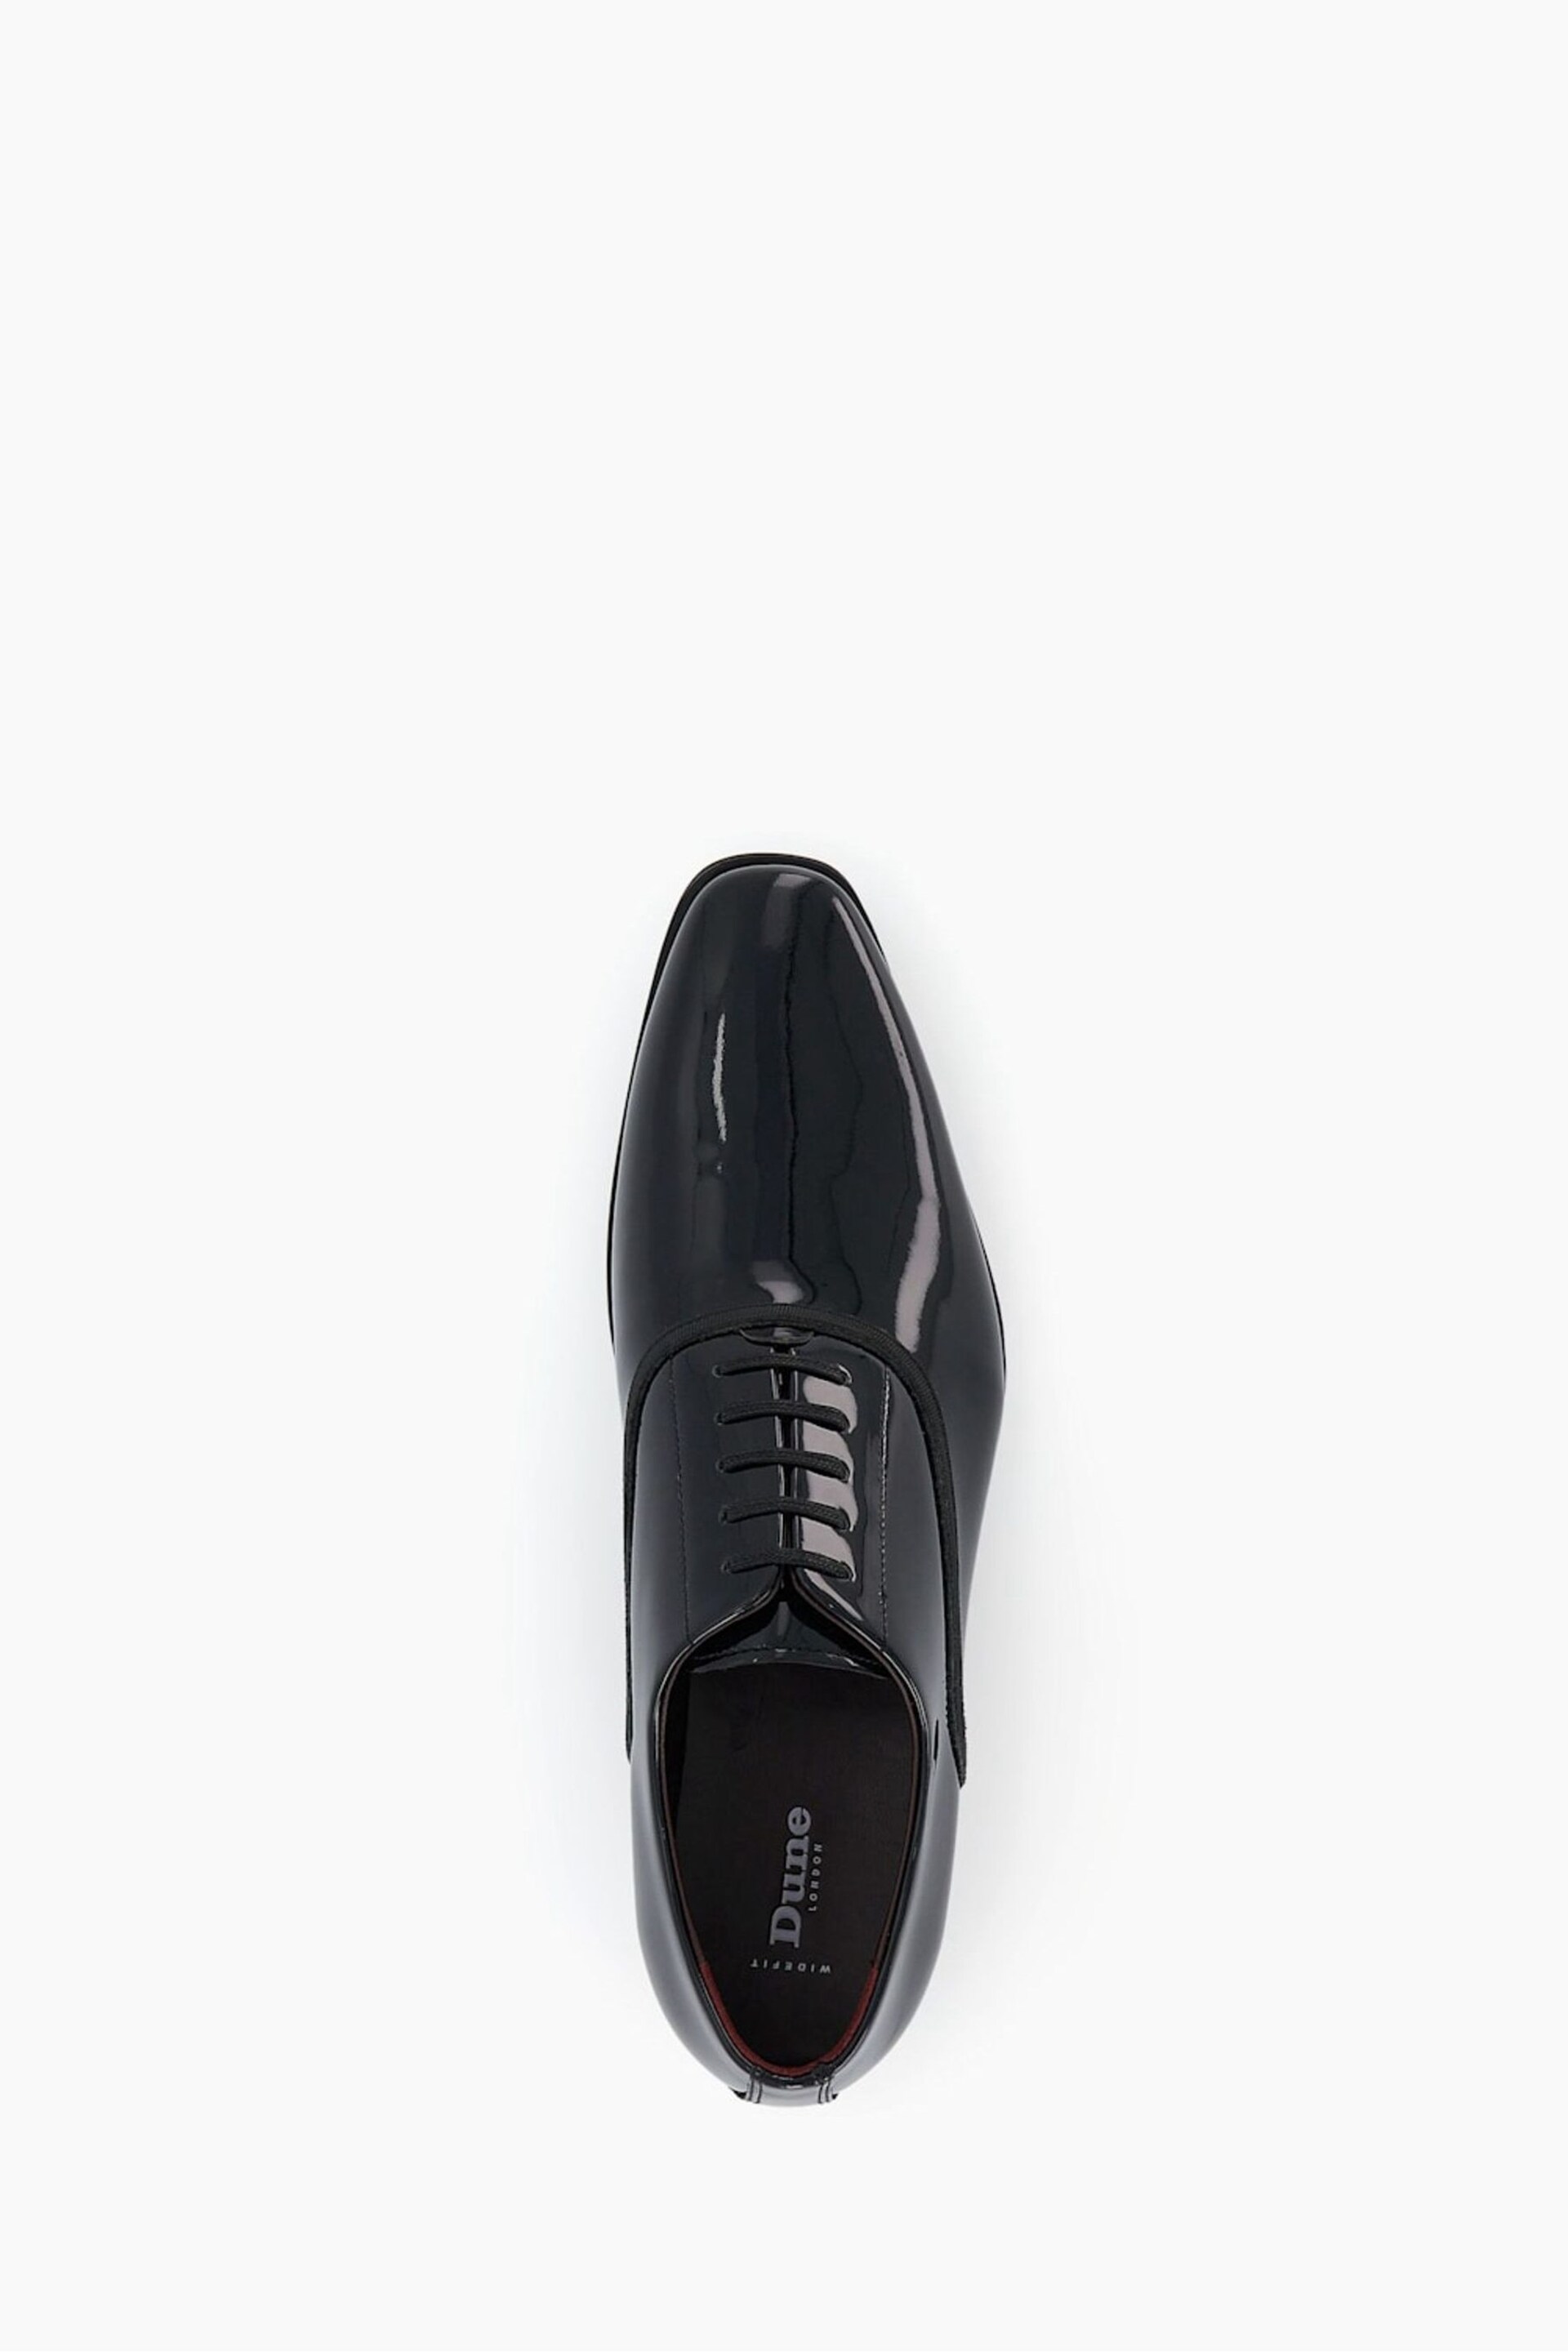 Dune London Black Wide Fit Swallow Patent Oxford Shoes - Image 4 of 6